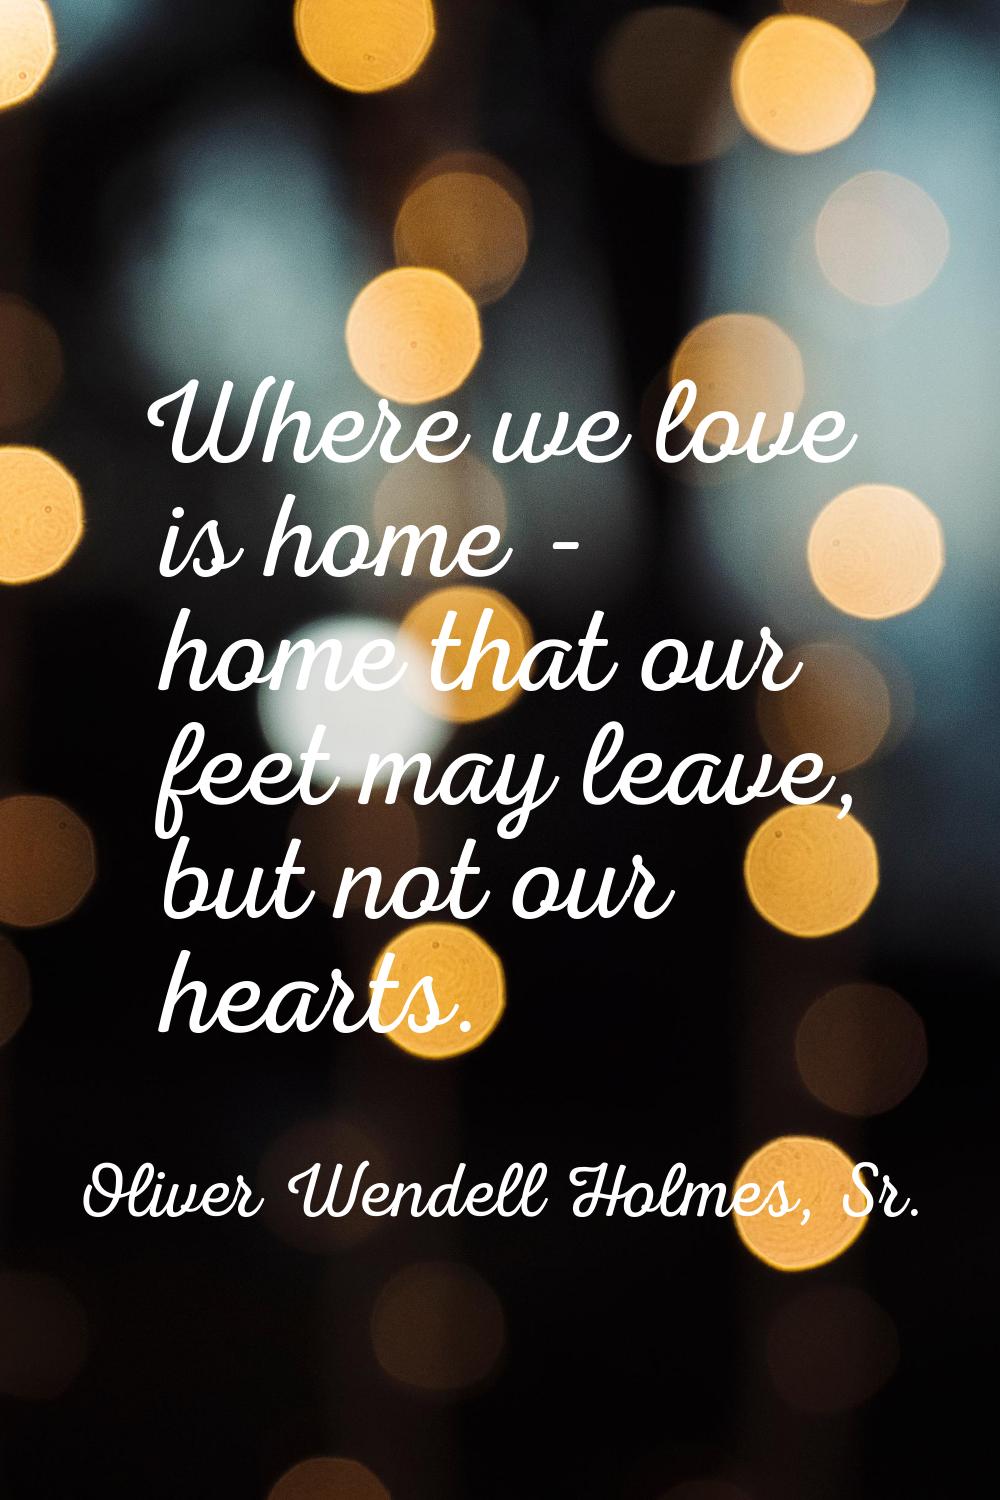 Where we love is home - home that our feet may leave, but not our hearts.